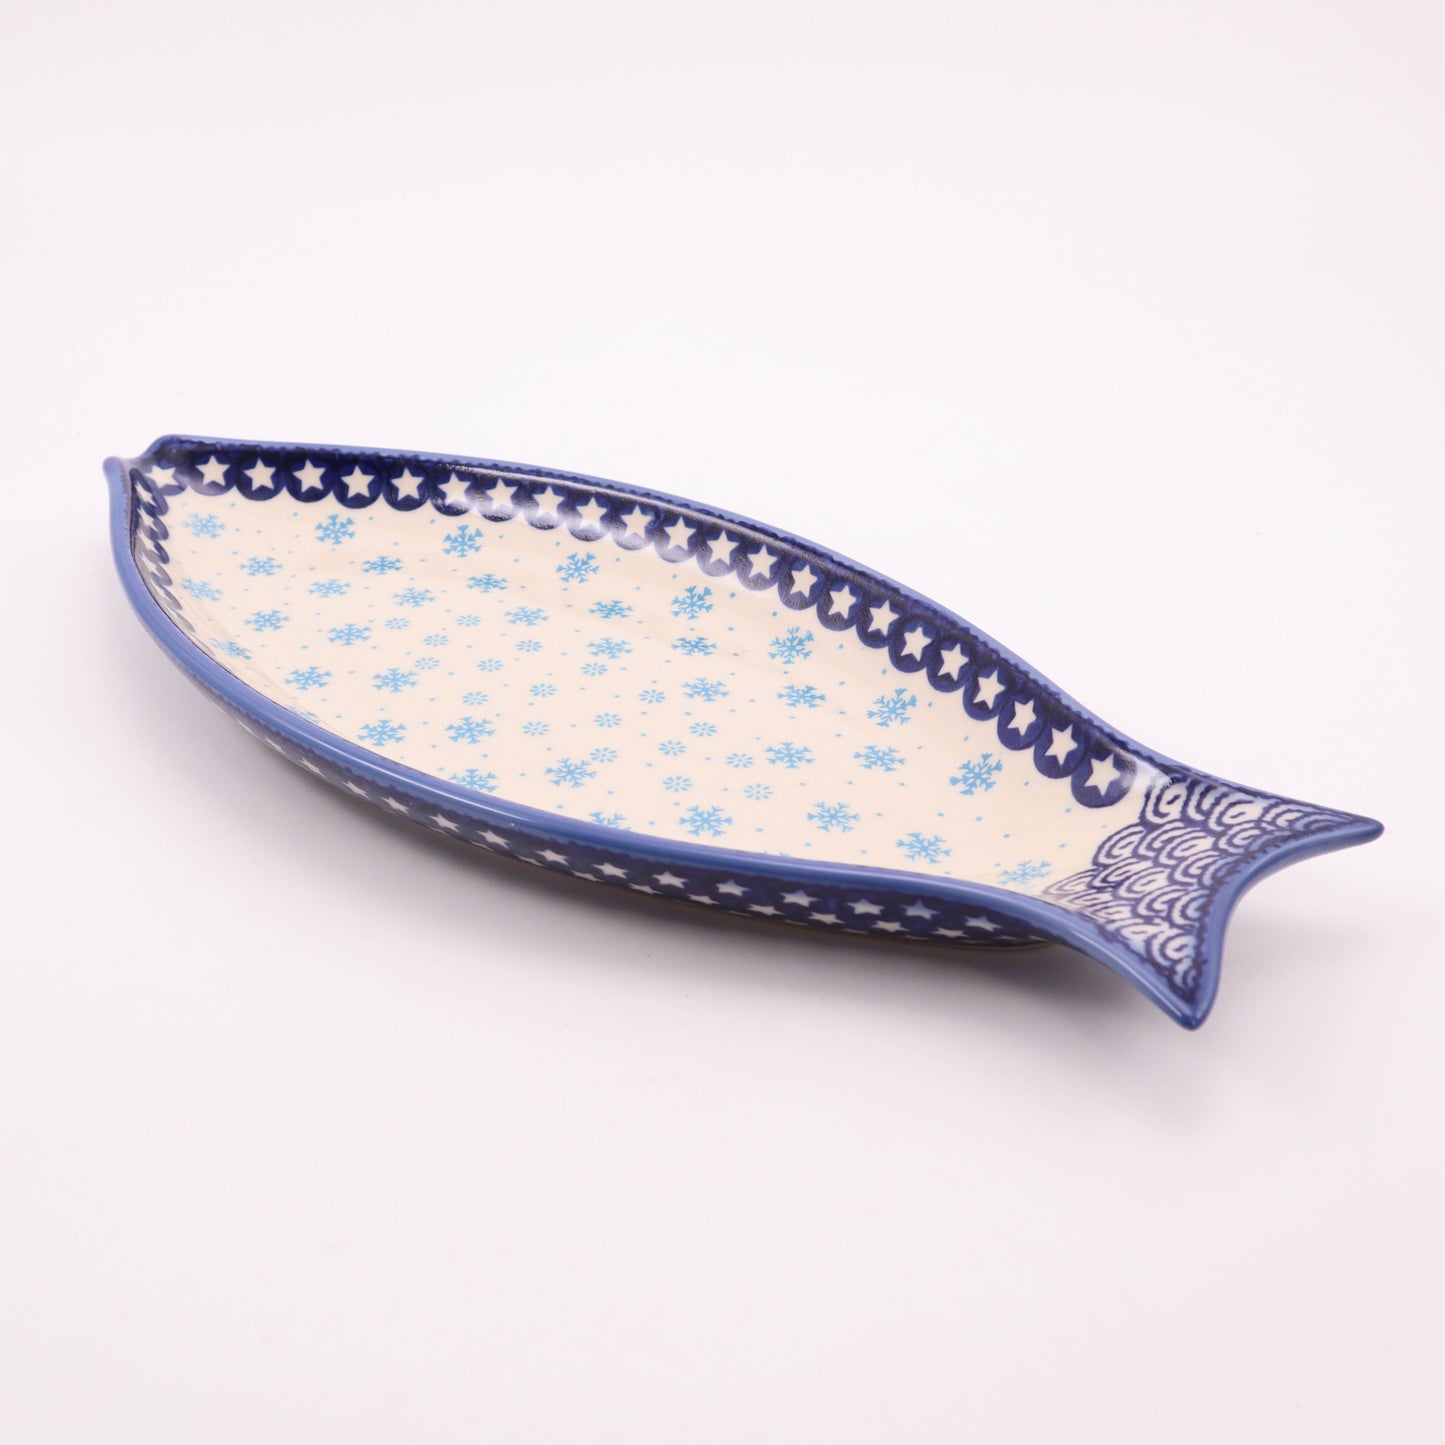 15"x7" Fish Platter. Pattern: Frosted Flakes